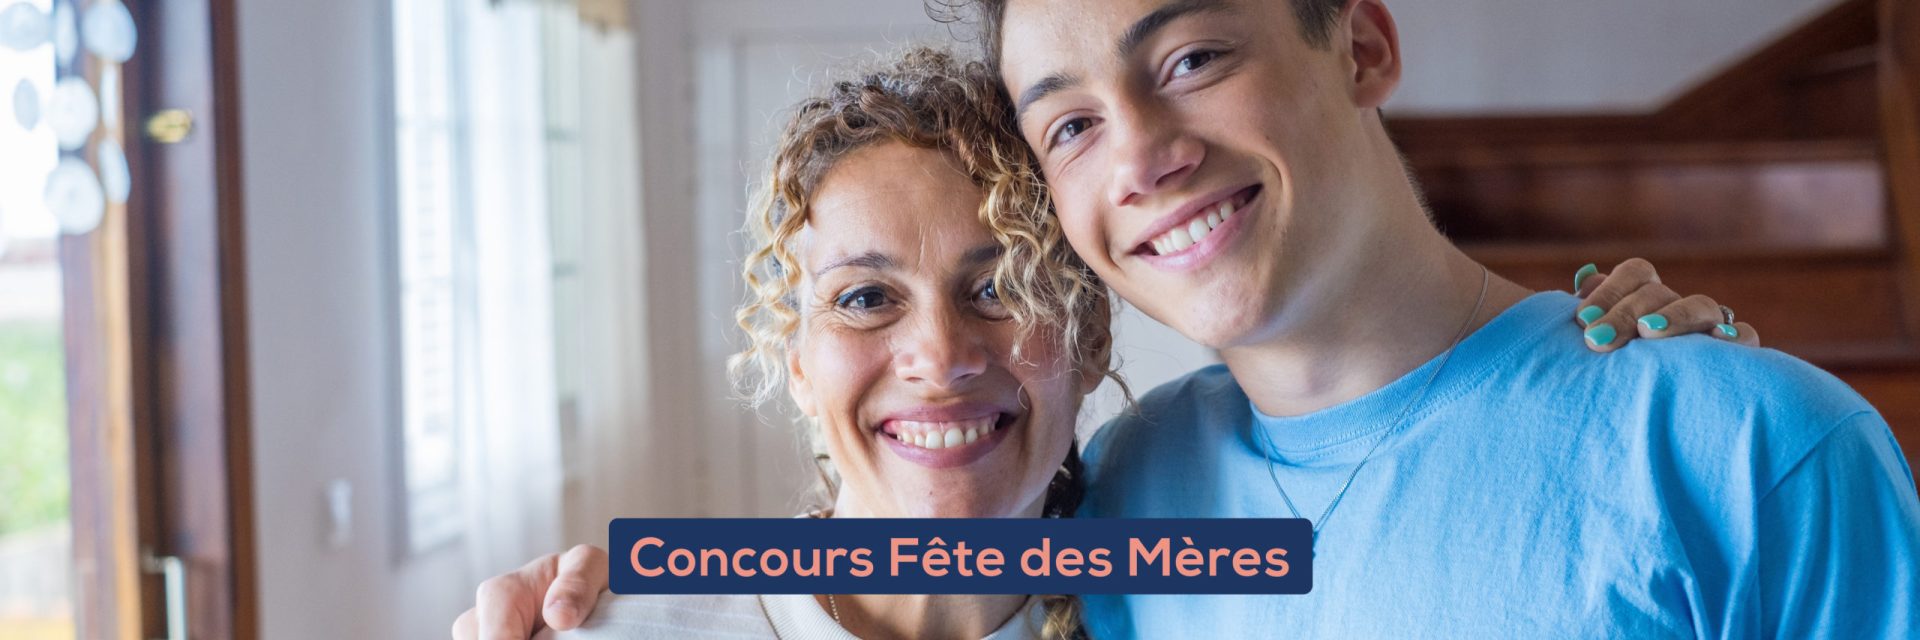 unireso-RS-FeteDesMeres_concours-cover